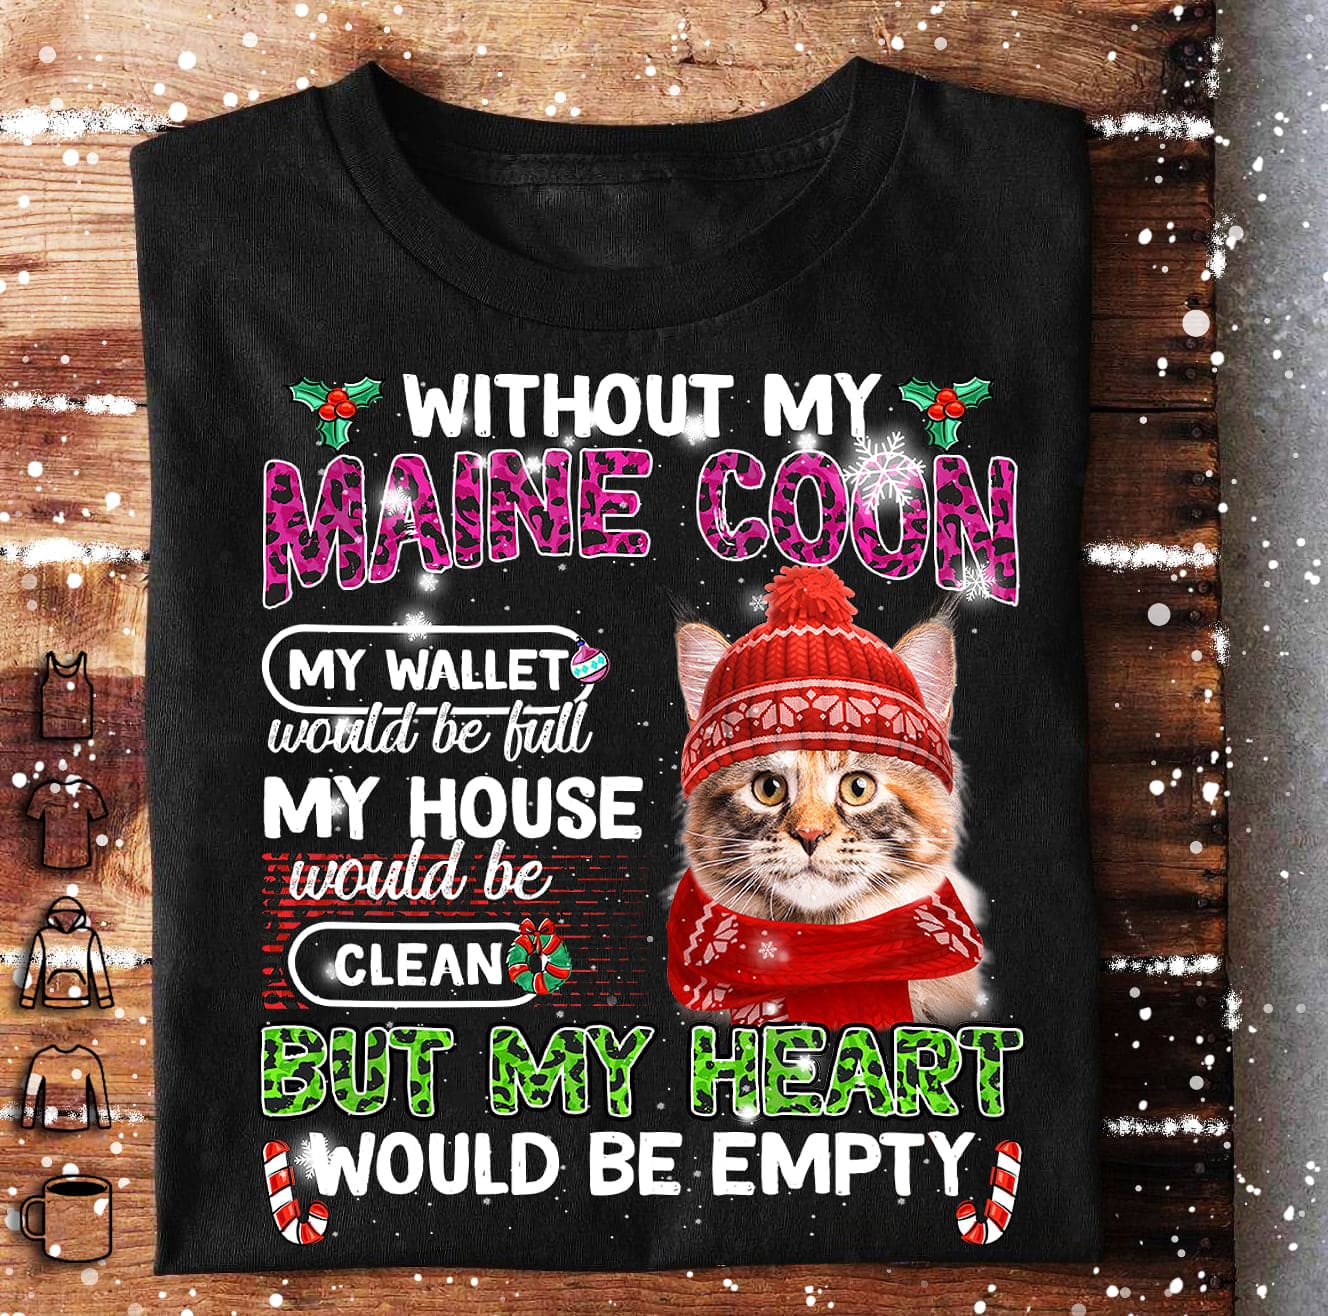 Without my maine coon - Christmas cat T-shirt, gift for Christmas